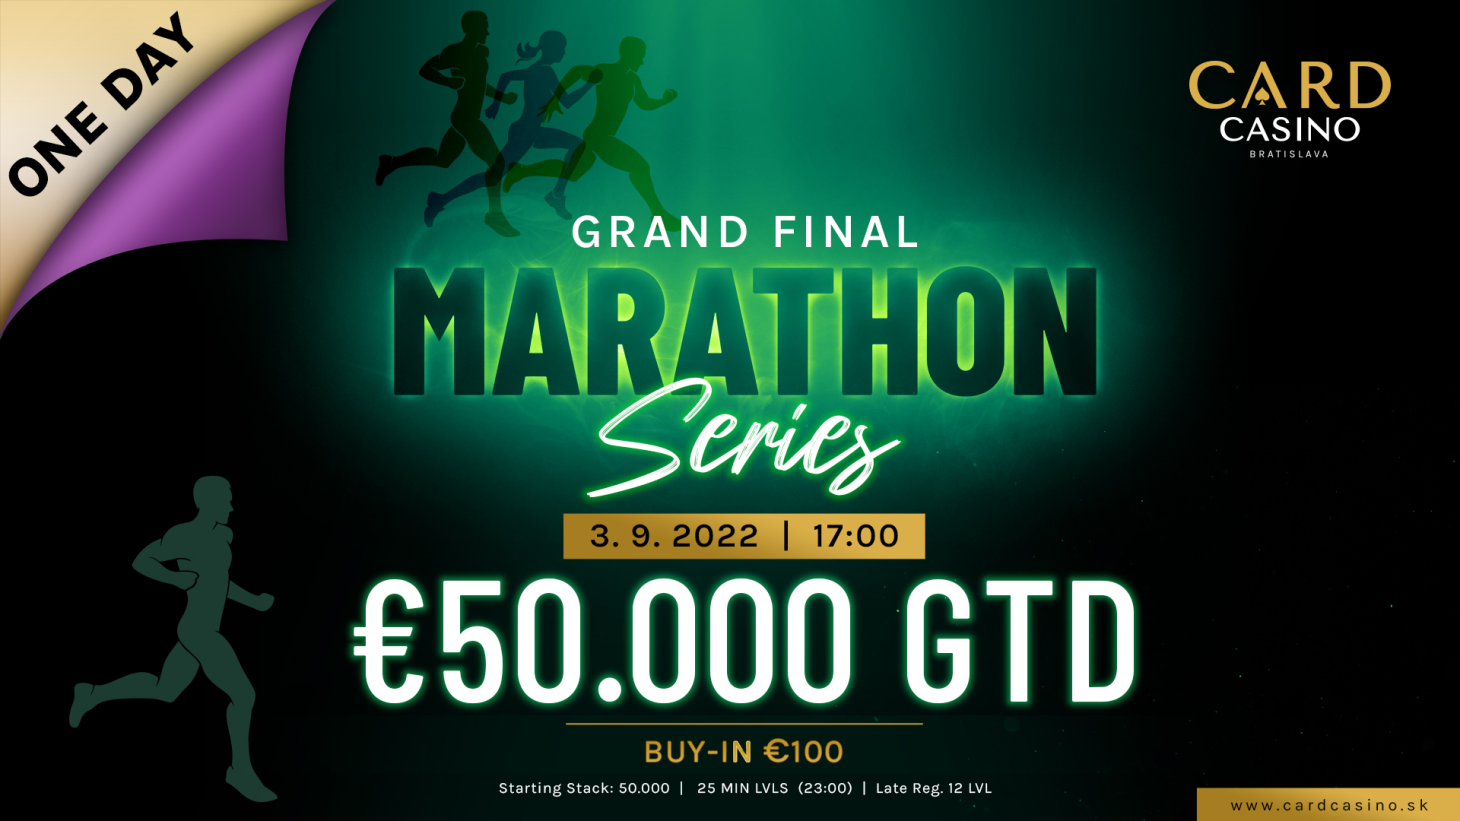 Wild Freeroll or Marathon Grand Final with €50,000! A week packed with poker